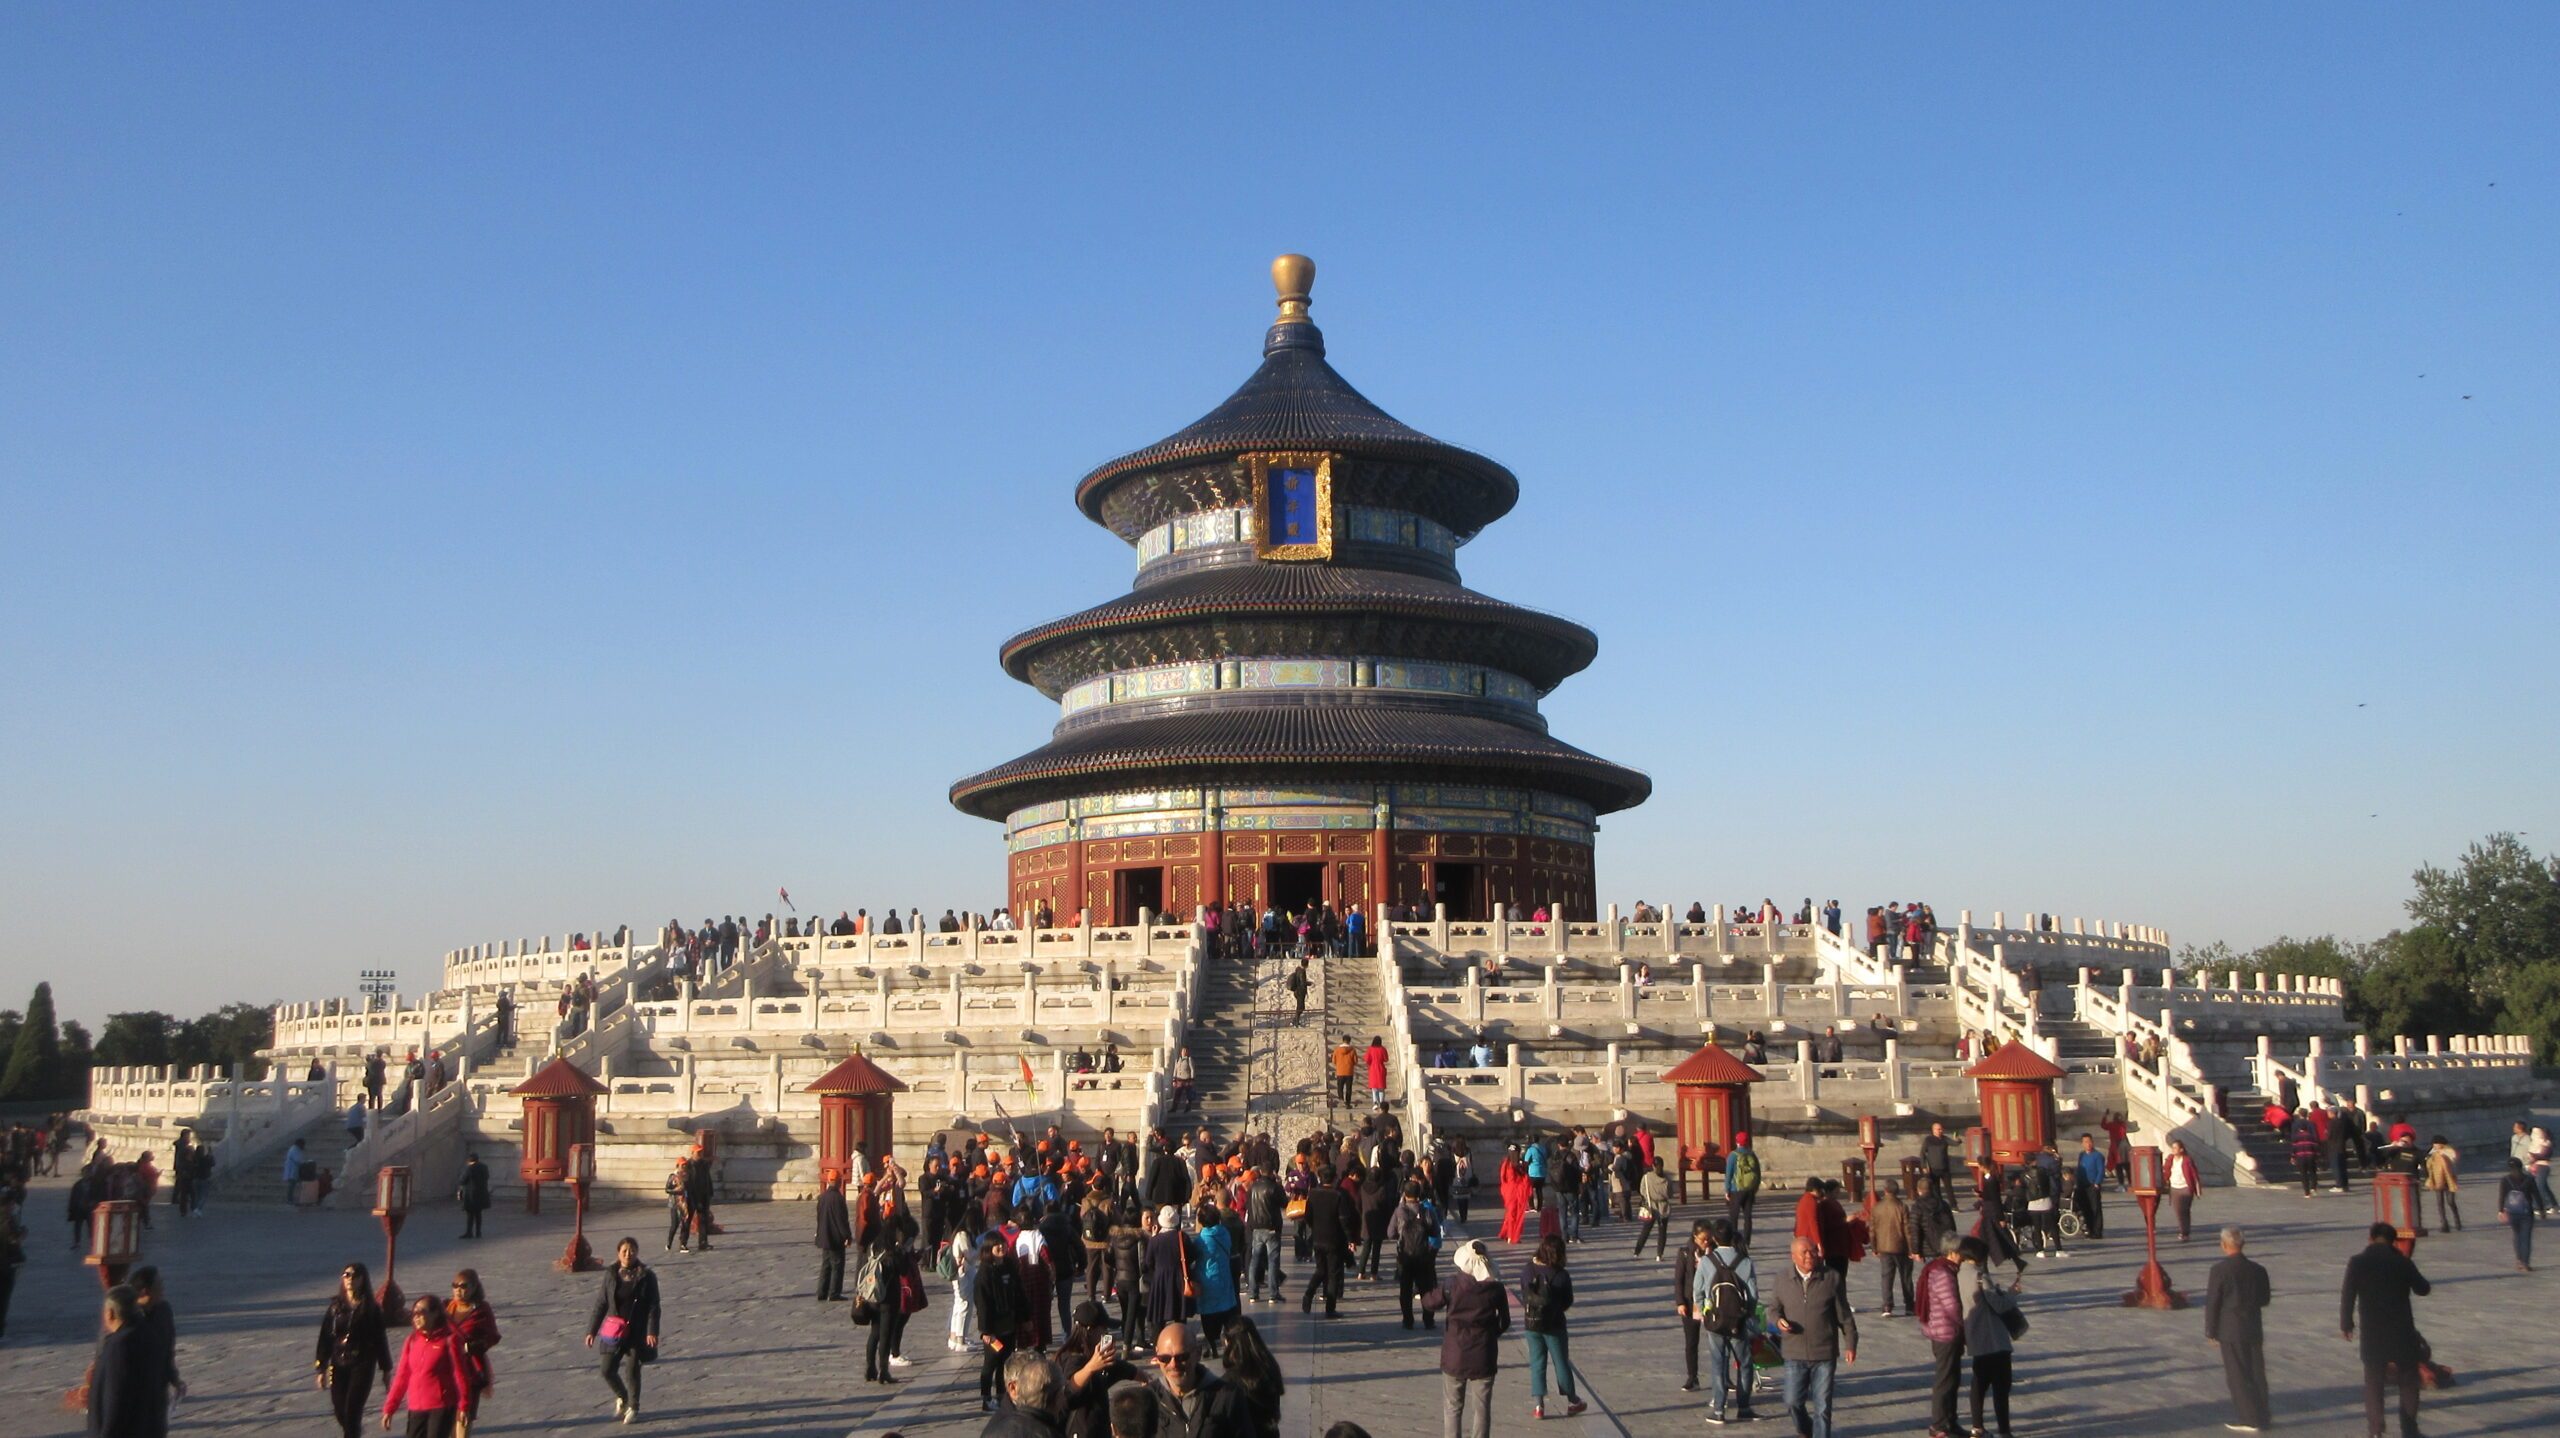 Planning a trip to Beijing? Here’s our suggested 6-day itinerary